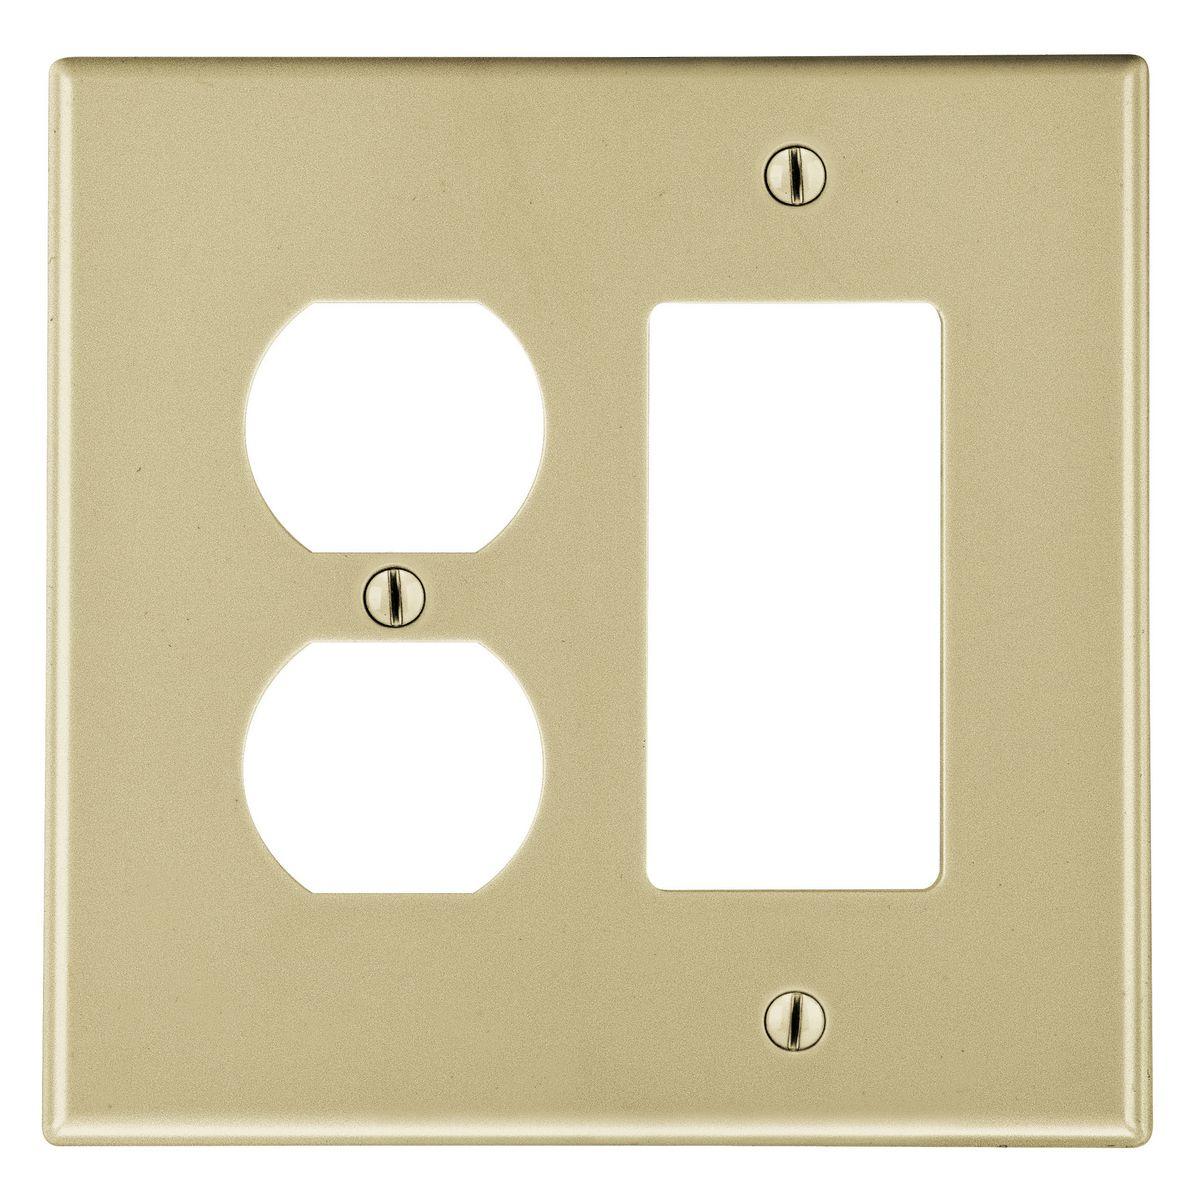 Hubbell P826I Wallplate, 2-Gang,  1) Duplex 1) Decorator, Ivory  ; High-impact, self-extinguishing polycarbonate material ; More Rigid ; Sharp lines and less dimpling ; Smooth satin finish ; Blends into wall with an optimum finish ; Smooth Satin Finish